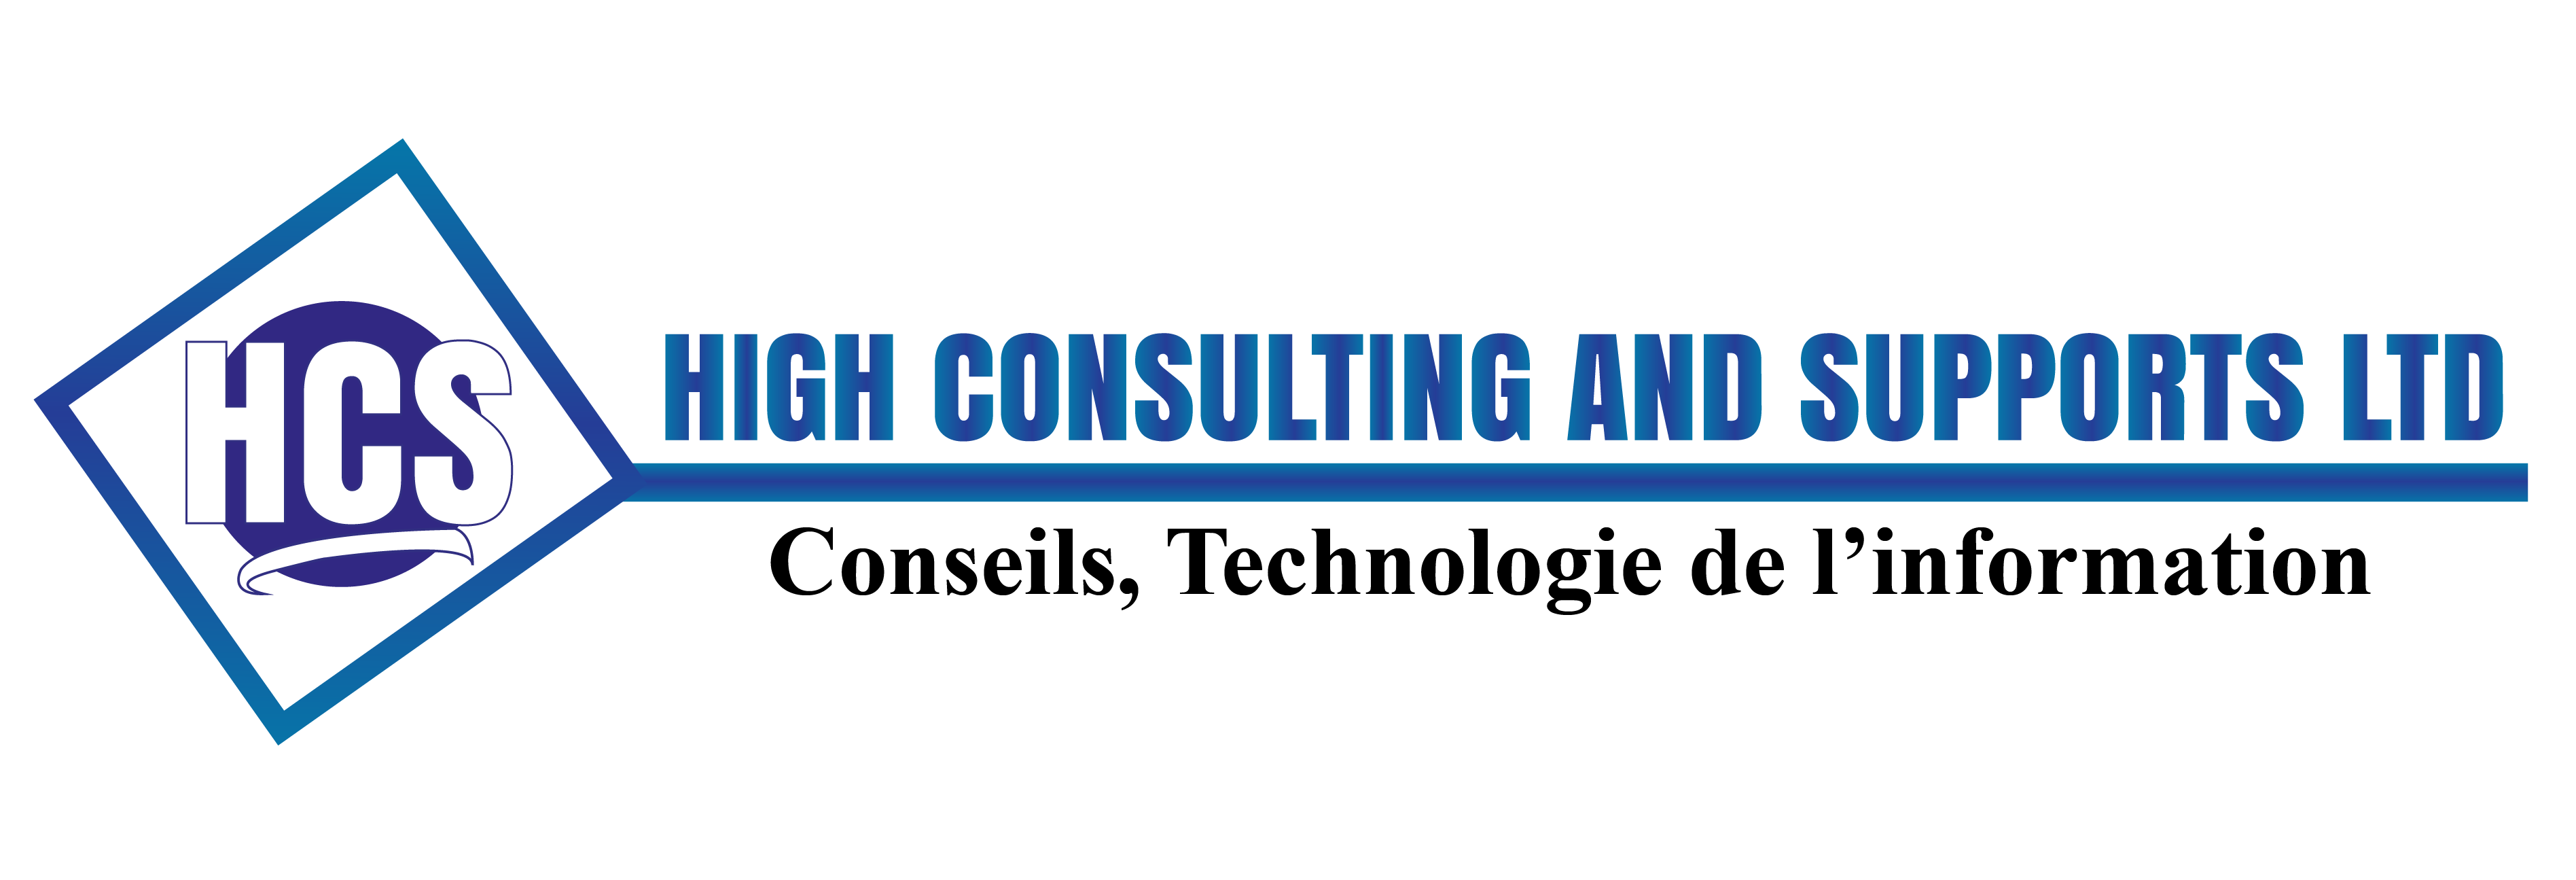 High Consulting and Supports Ltd